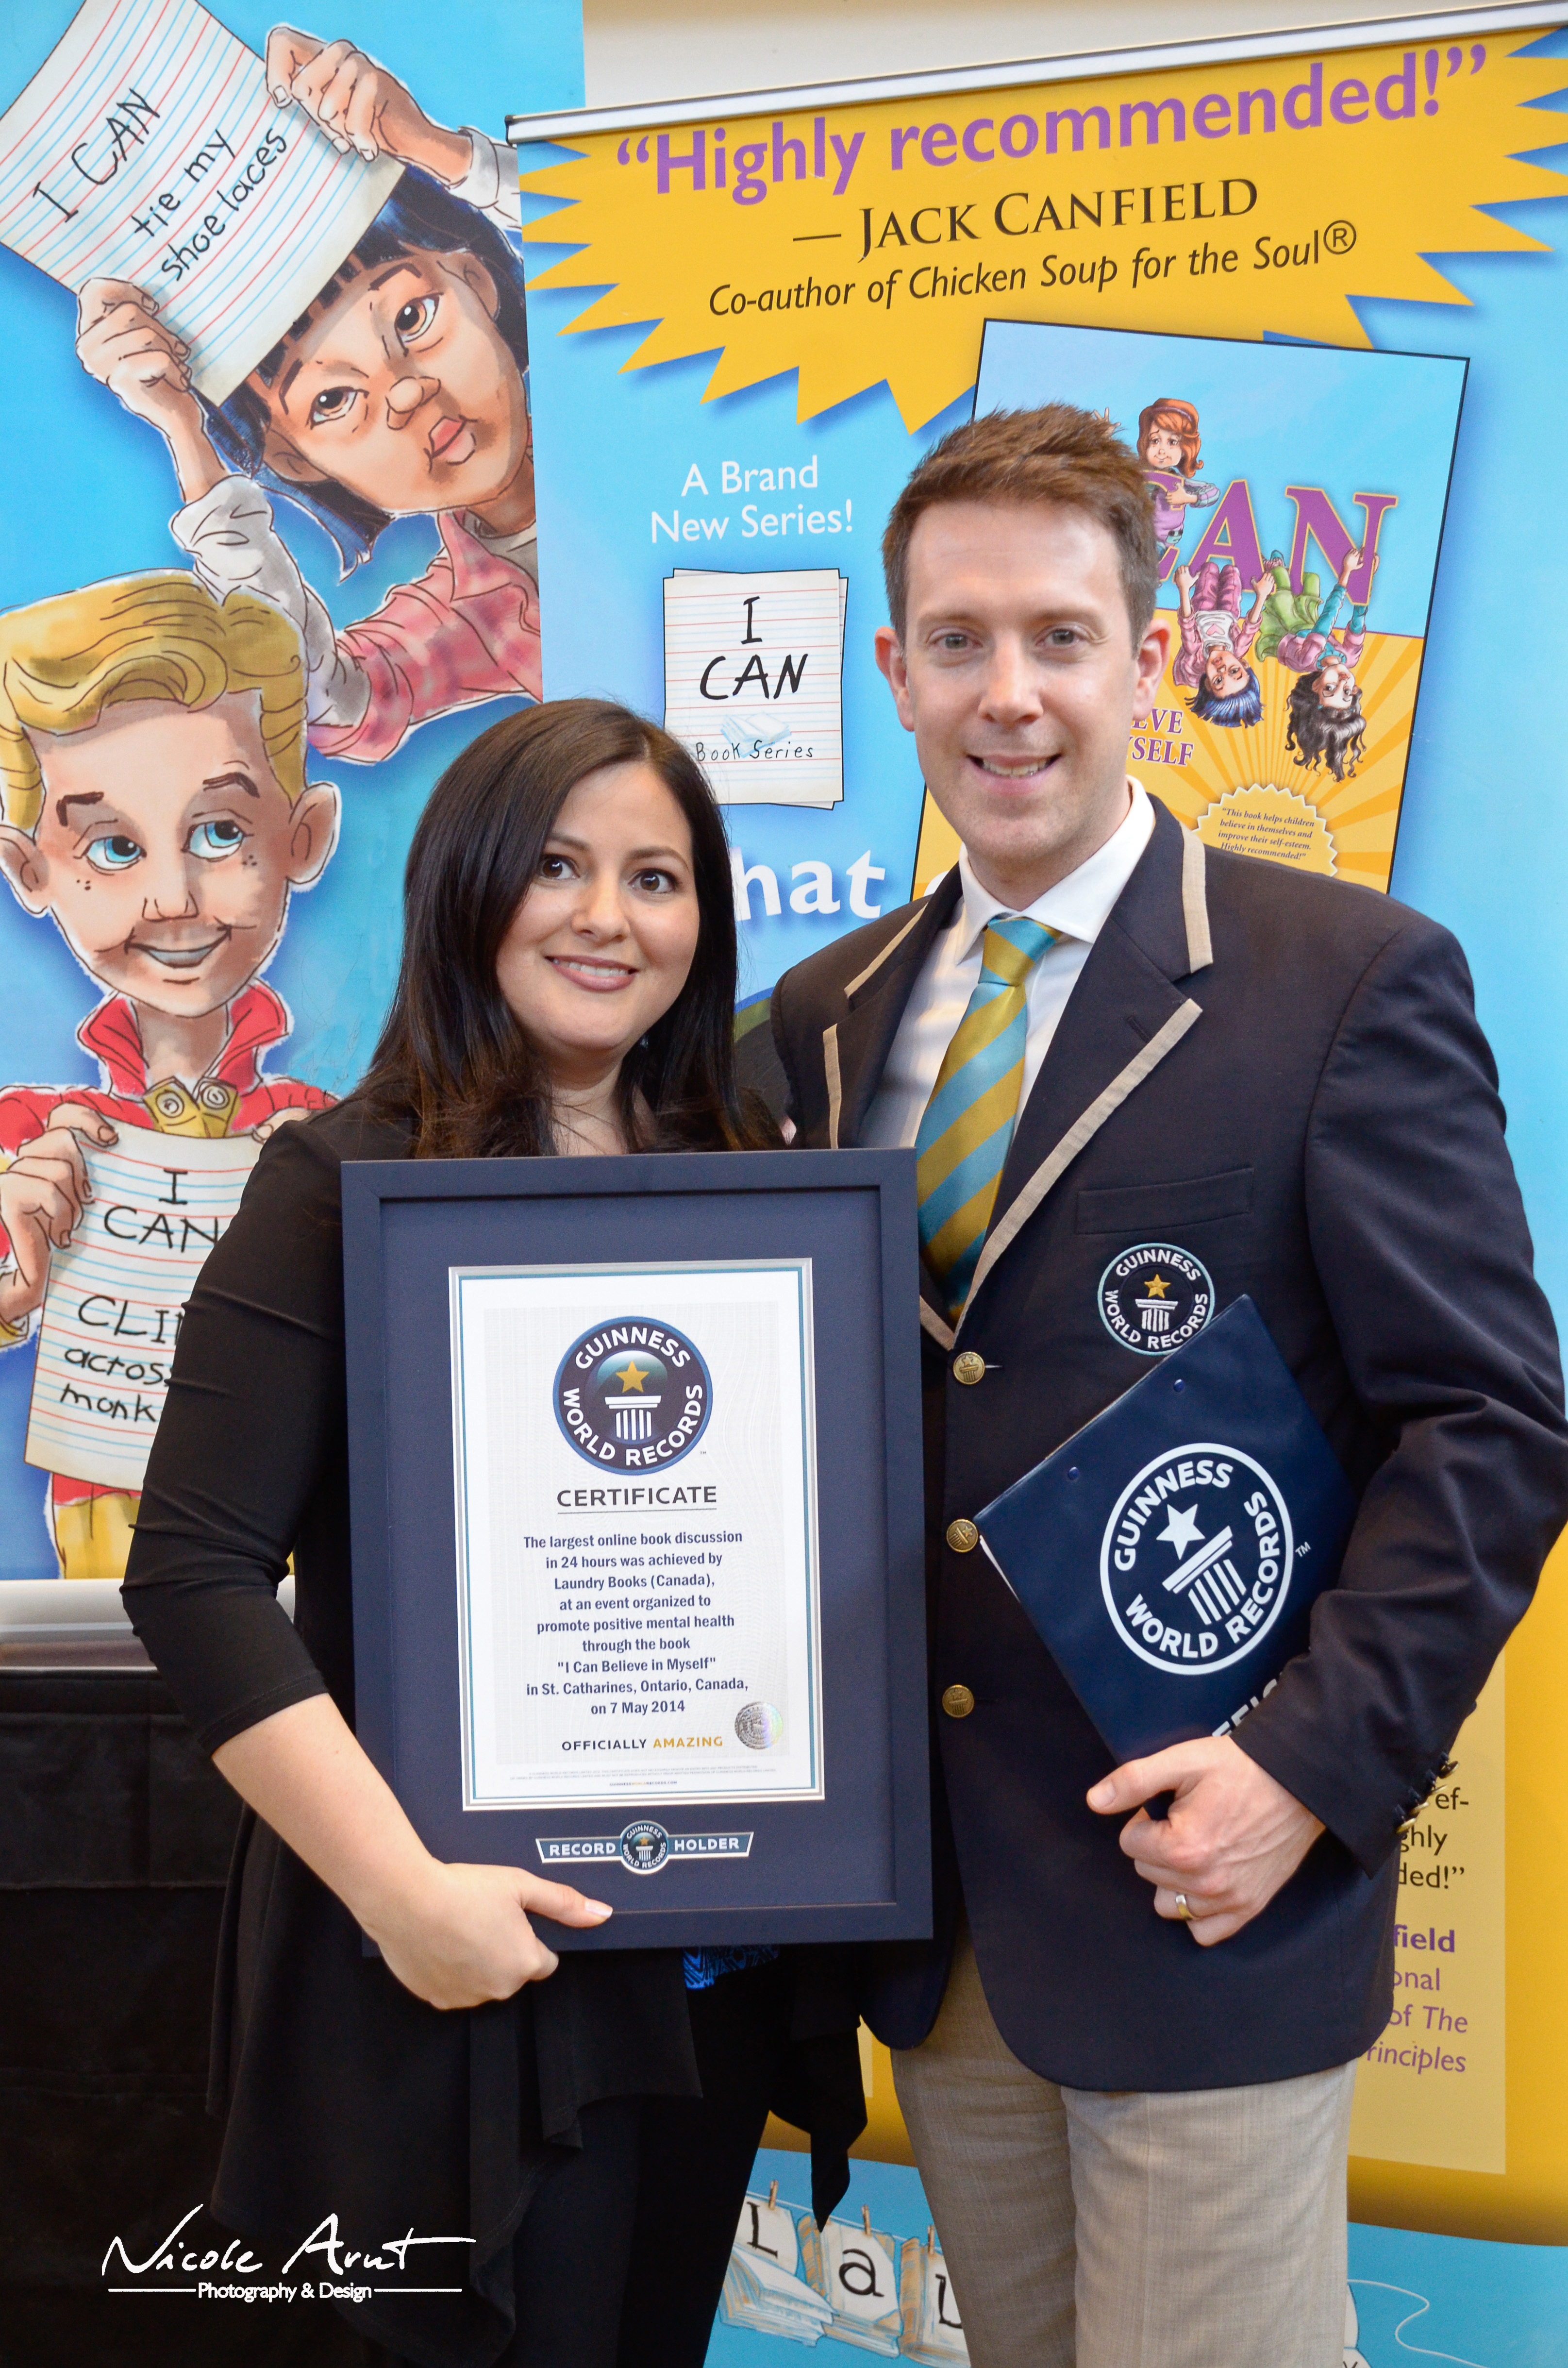 Miriam achieving her biggest goal, holding her Guinness World Record next to the Guinness World Record adjudicator.